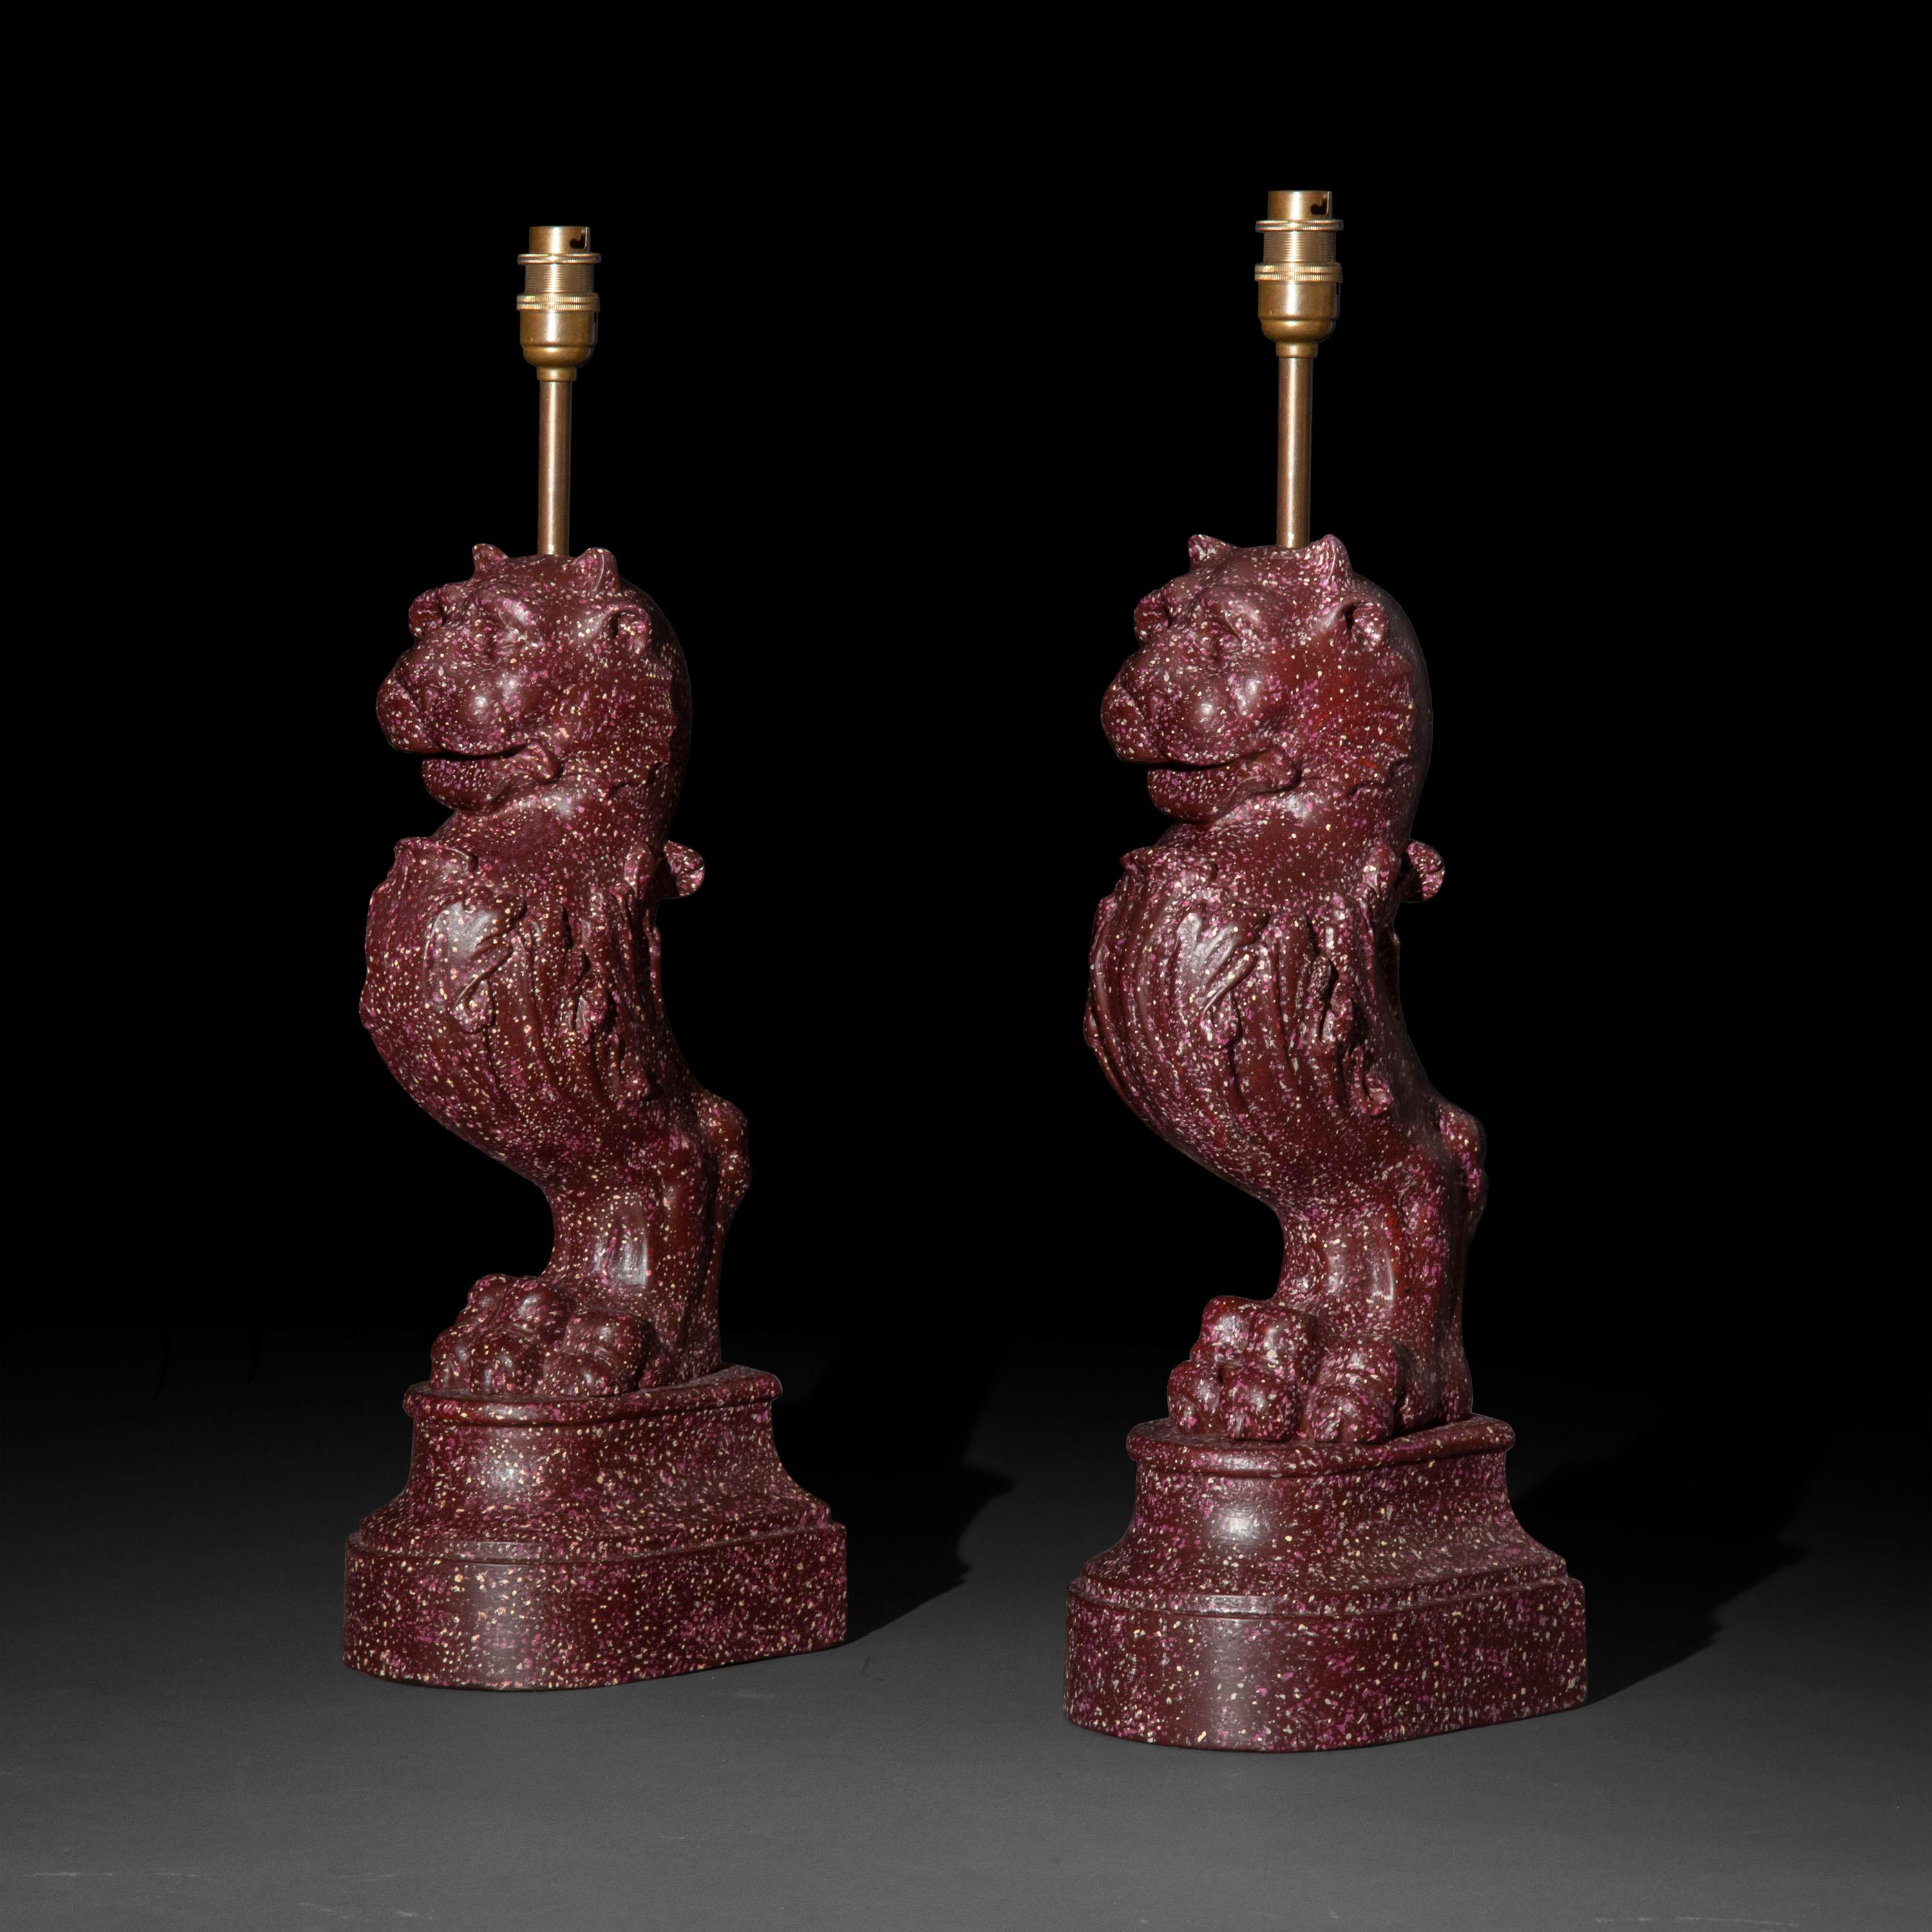 An interesting pair of Regency style cast metal table lamps, modelled as Roman lion-headed trapezophoros, decorated to simulate Egyptian imperial porphyry.

Why we like them
A rather unusual object; well-cast and of great heavy quality. We love